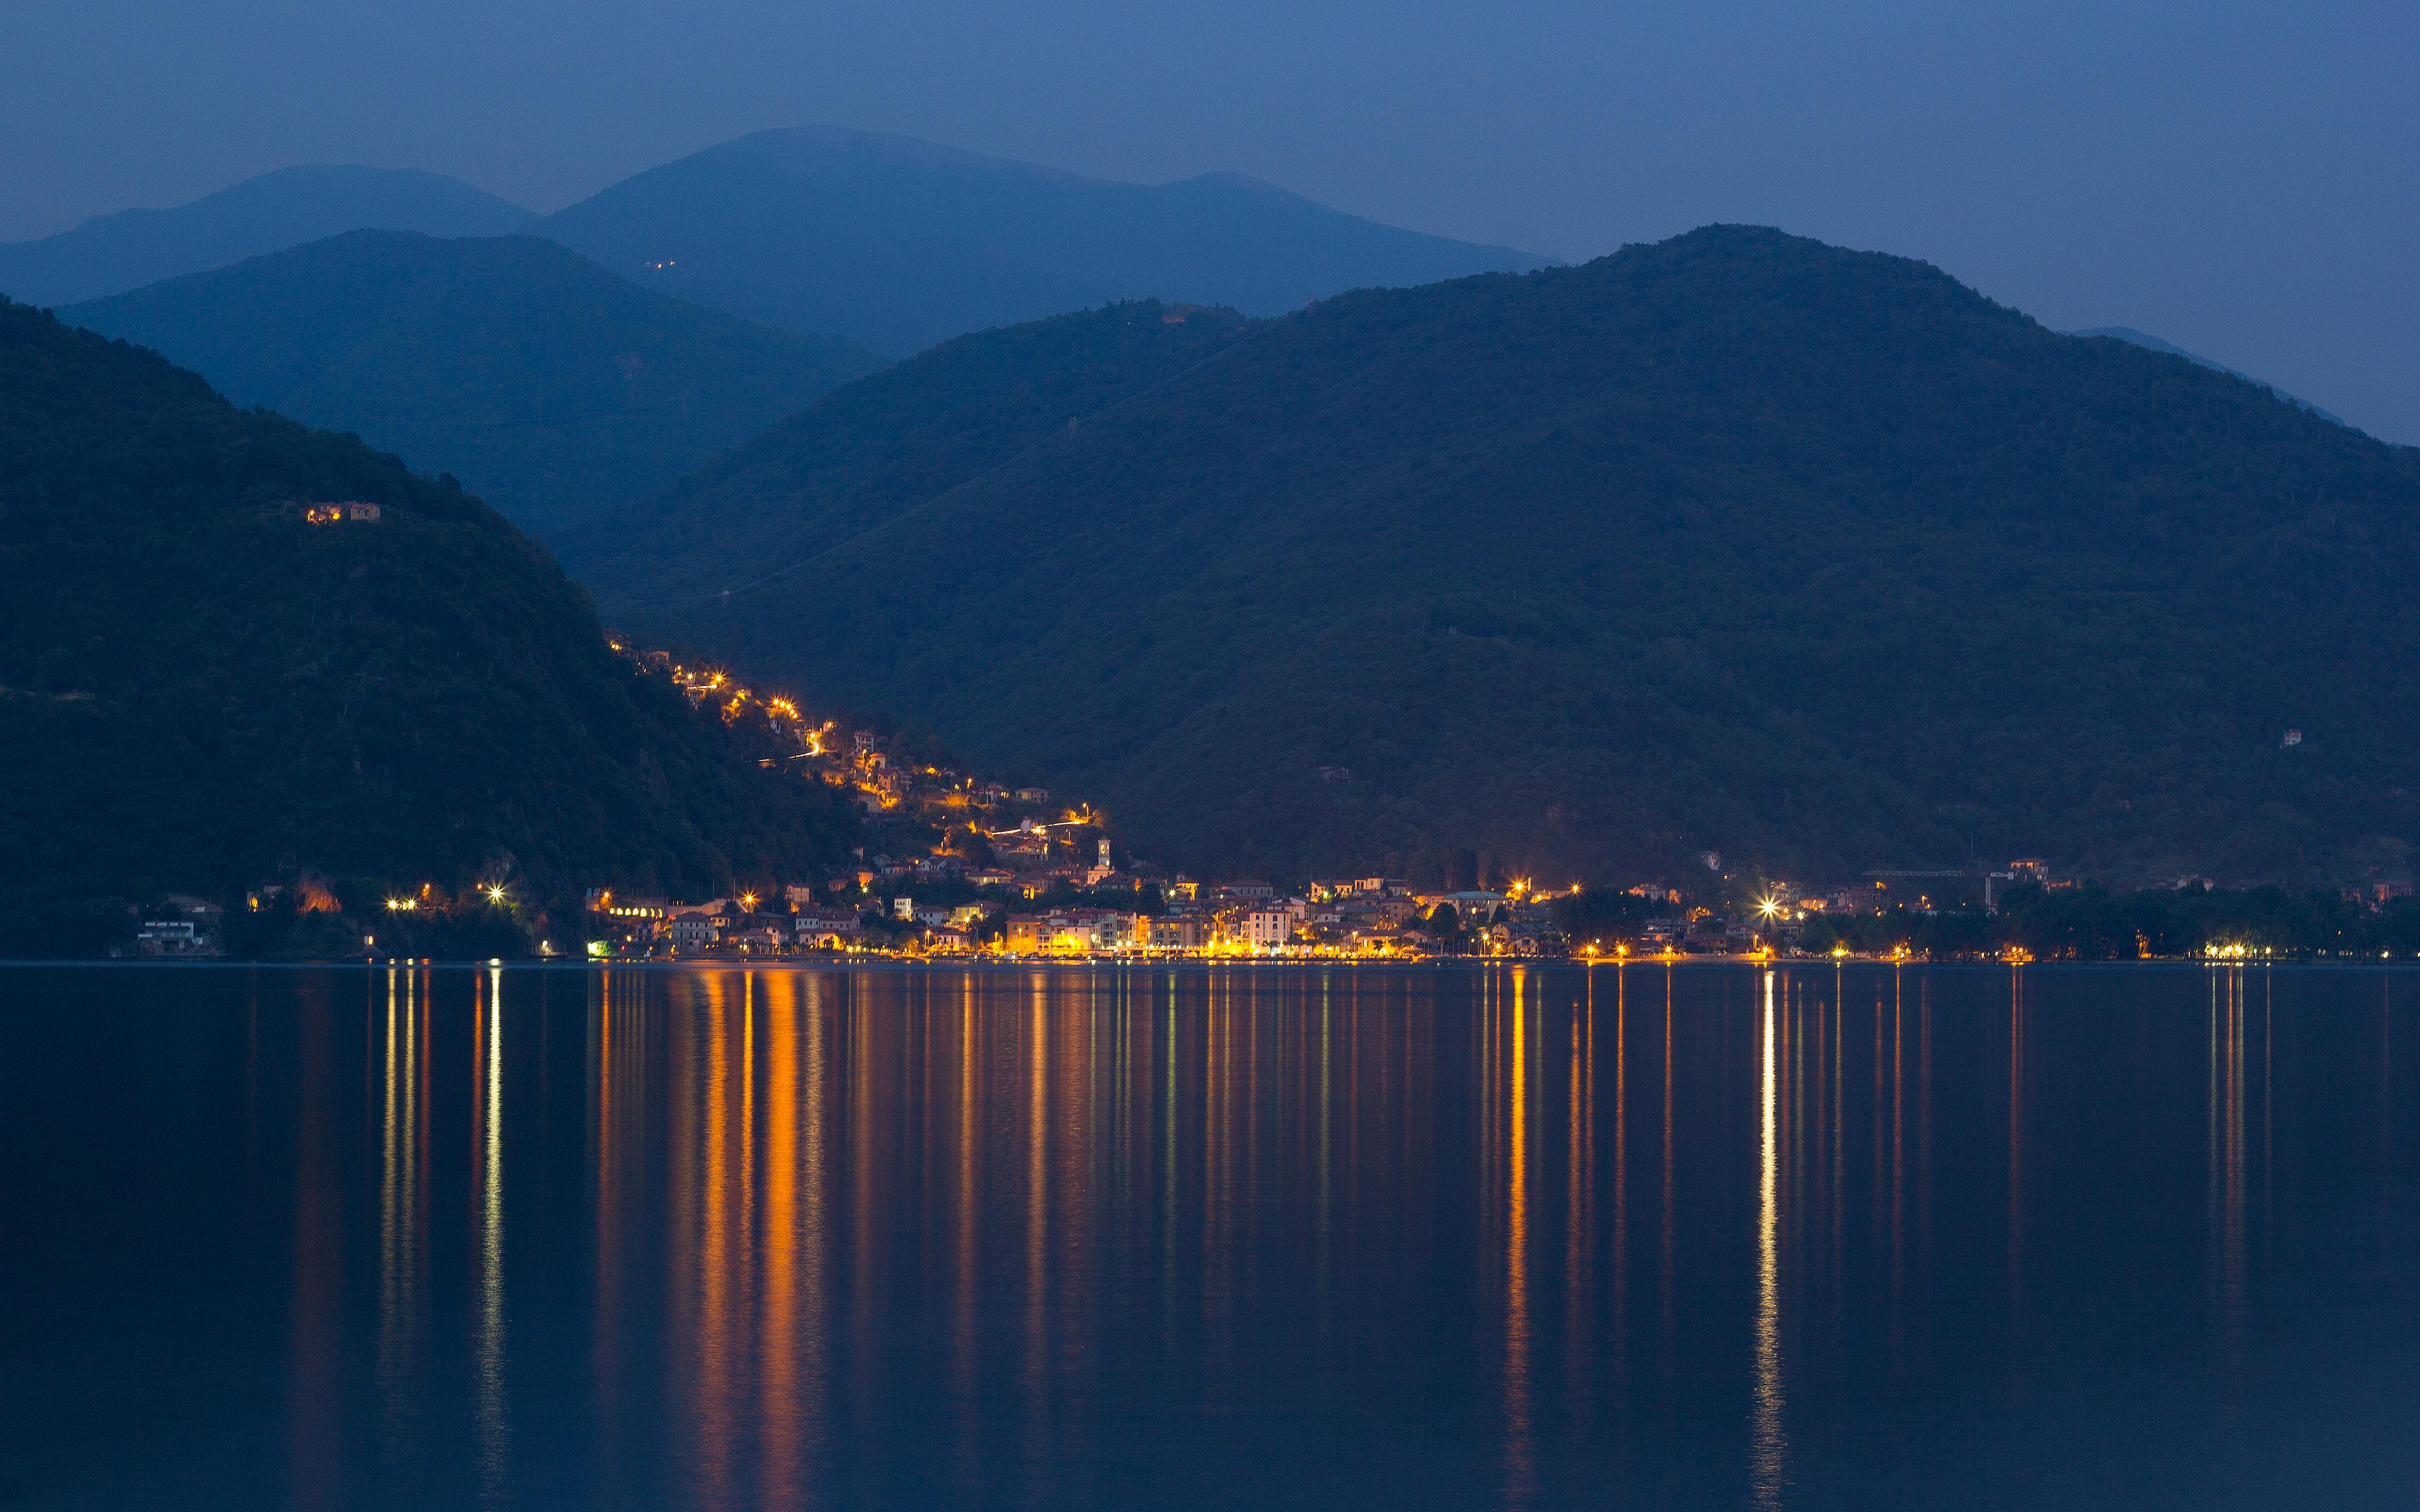 A little town on Lake Maggiore in Italy wallpaper and image